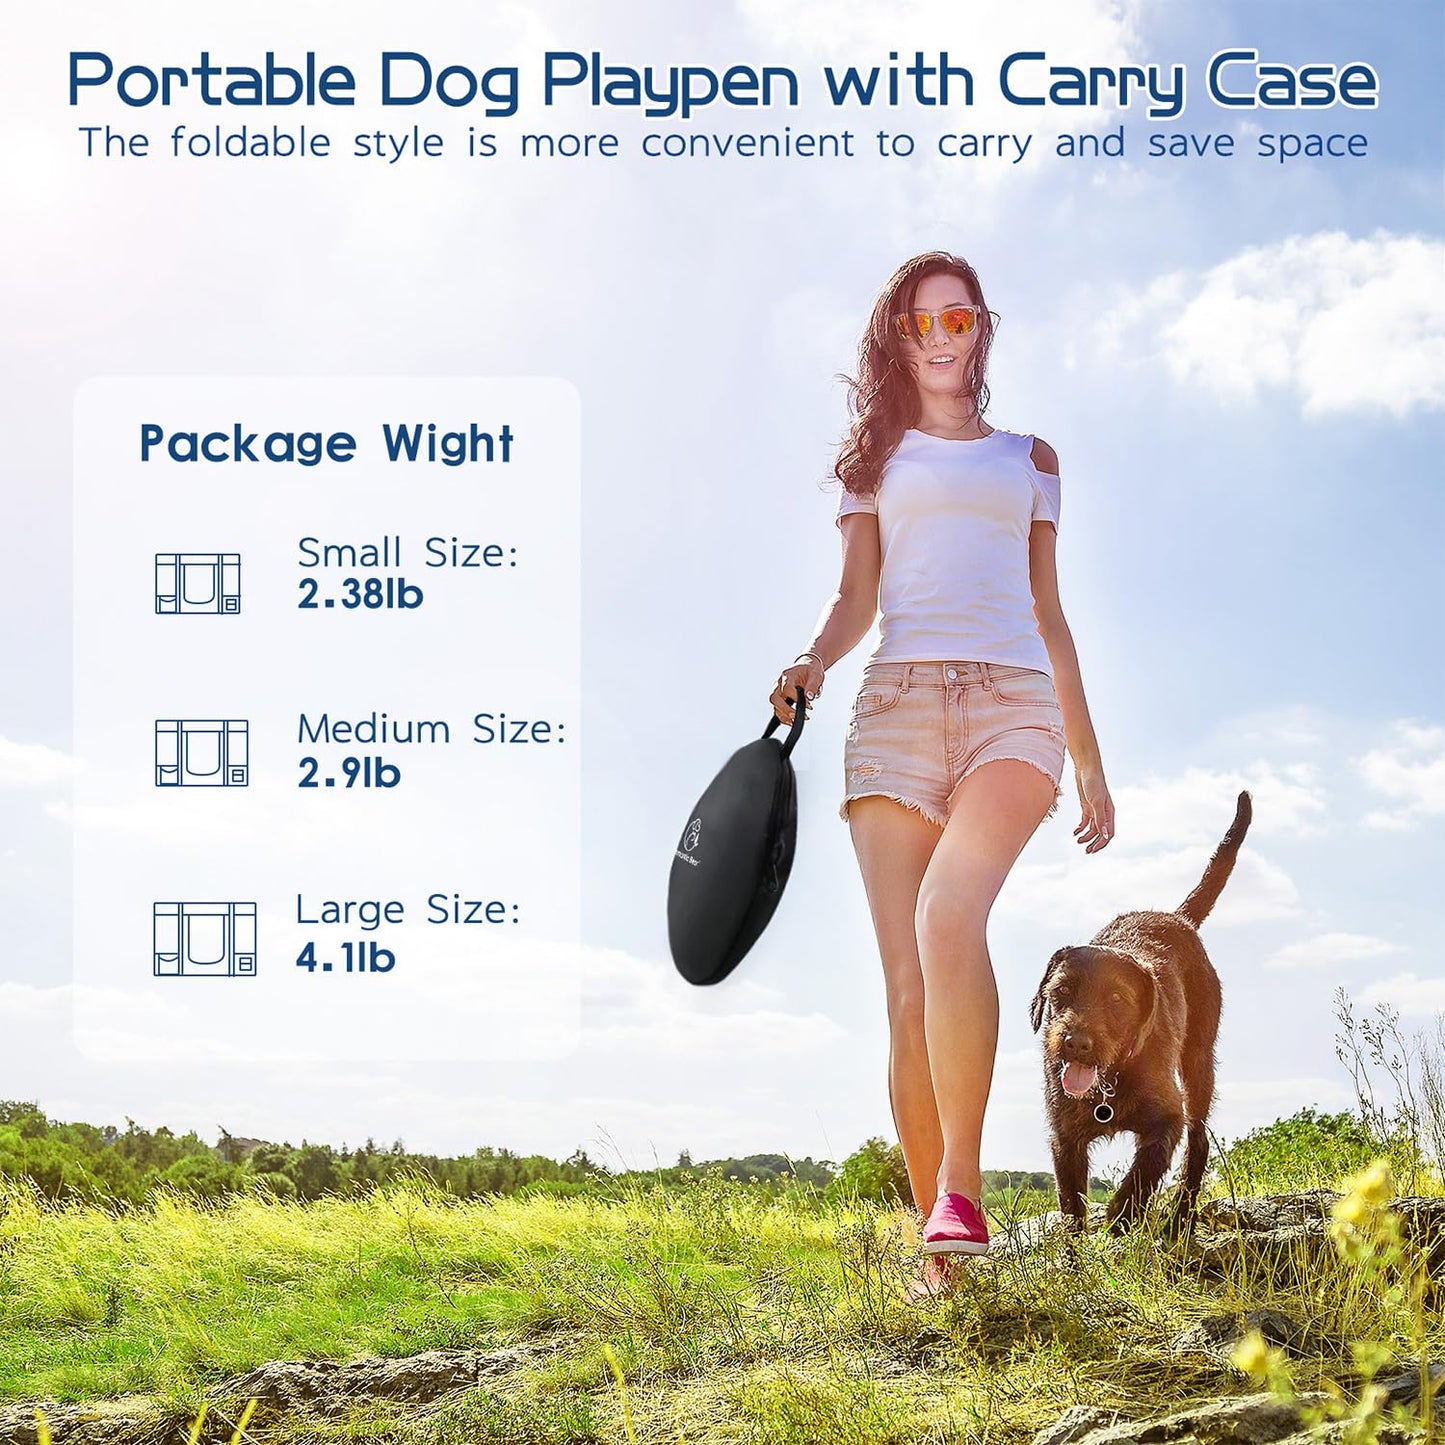 Dog Playpen,Pet Playpen, Foldable Dog Cat Playpens,Portable Exercise Kennel Tent Crate, Water-Resistant Breathable Shade Cover, Indoor Outdoor Travel Camping Use for Small Animals + Free Carrying Case